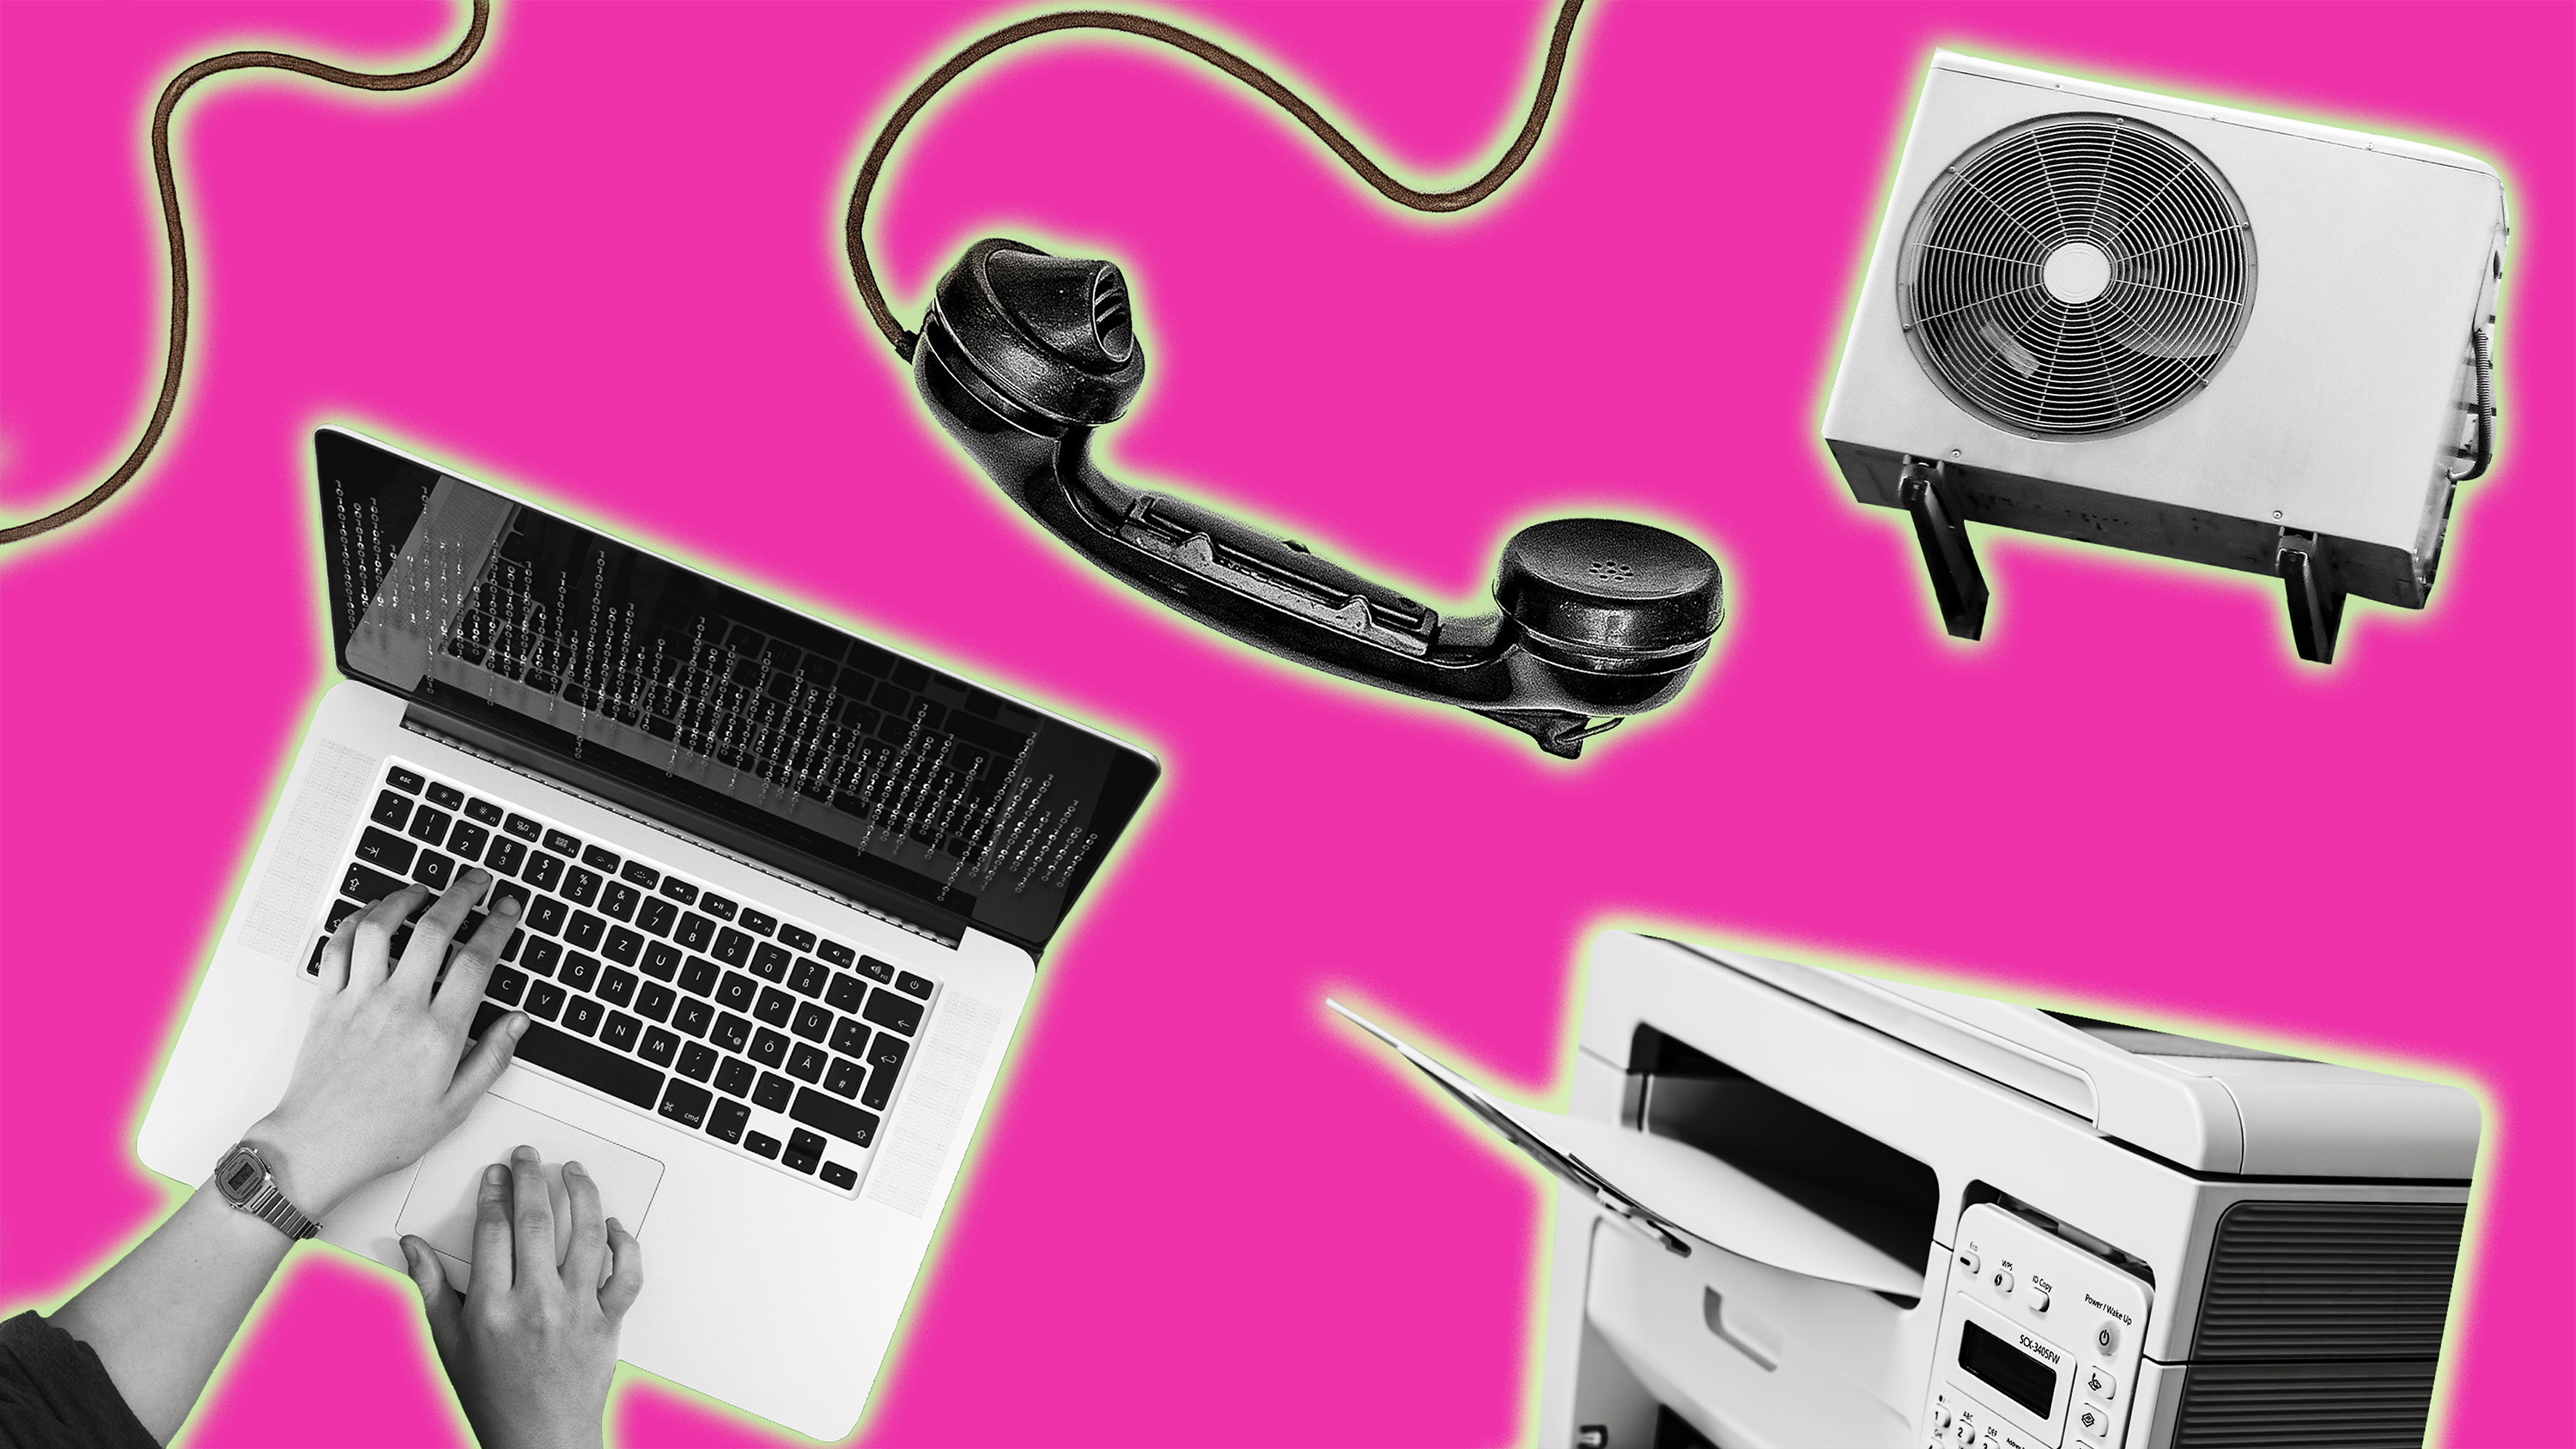 image of person typing on keyboard on left, printer and fax machine on lower right, and phone on top in black and white with bright pink background